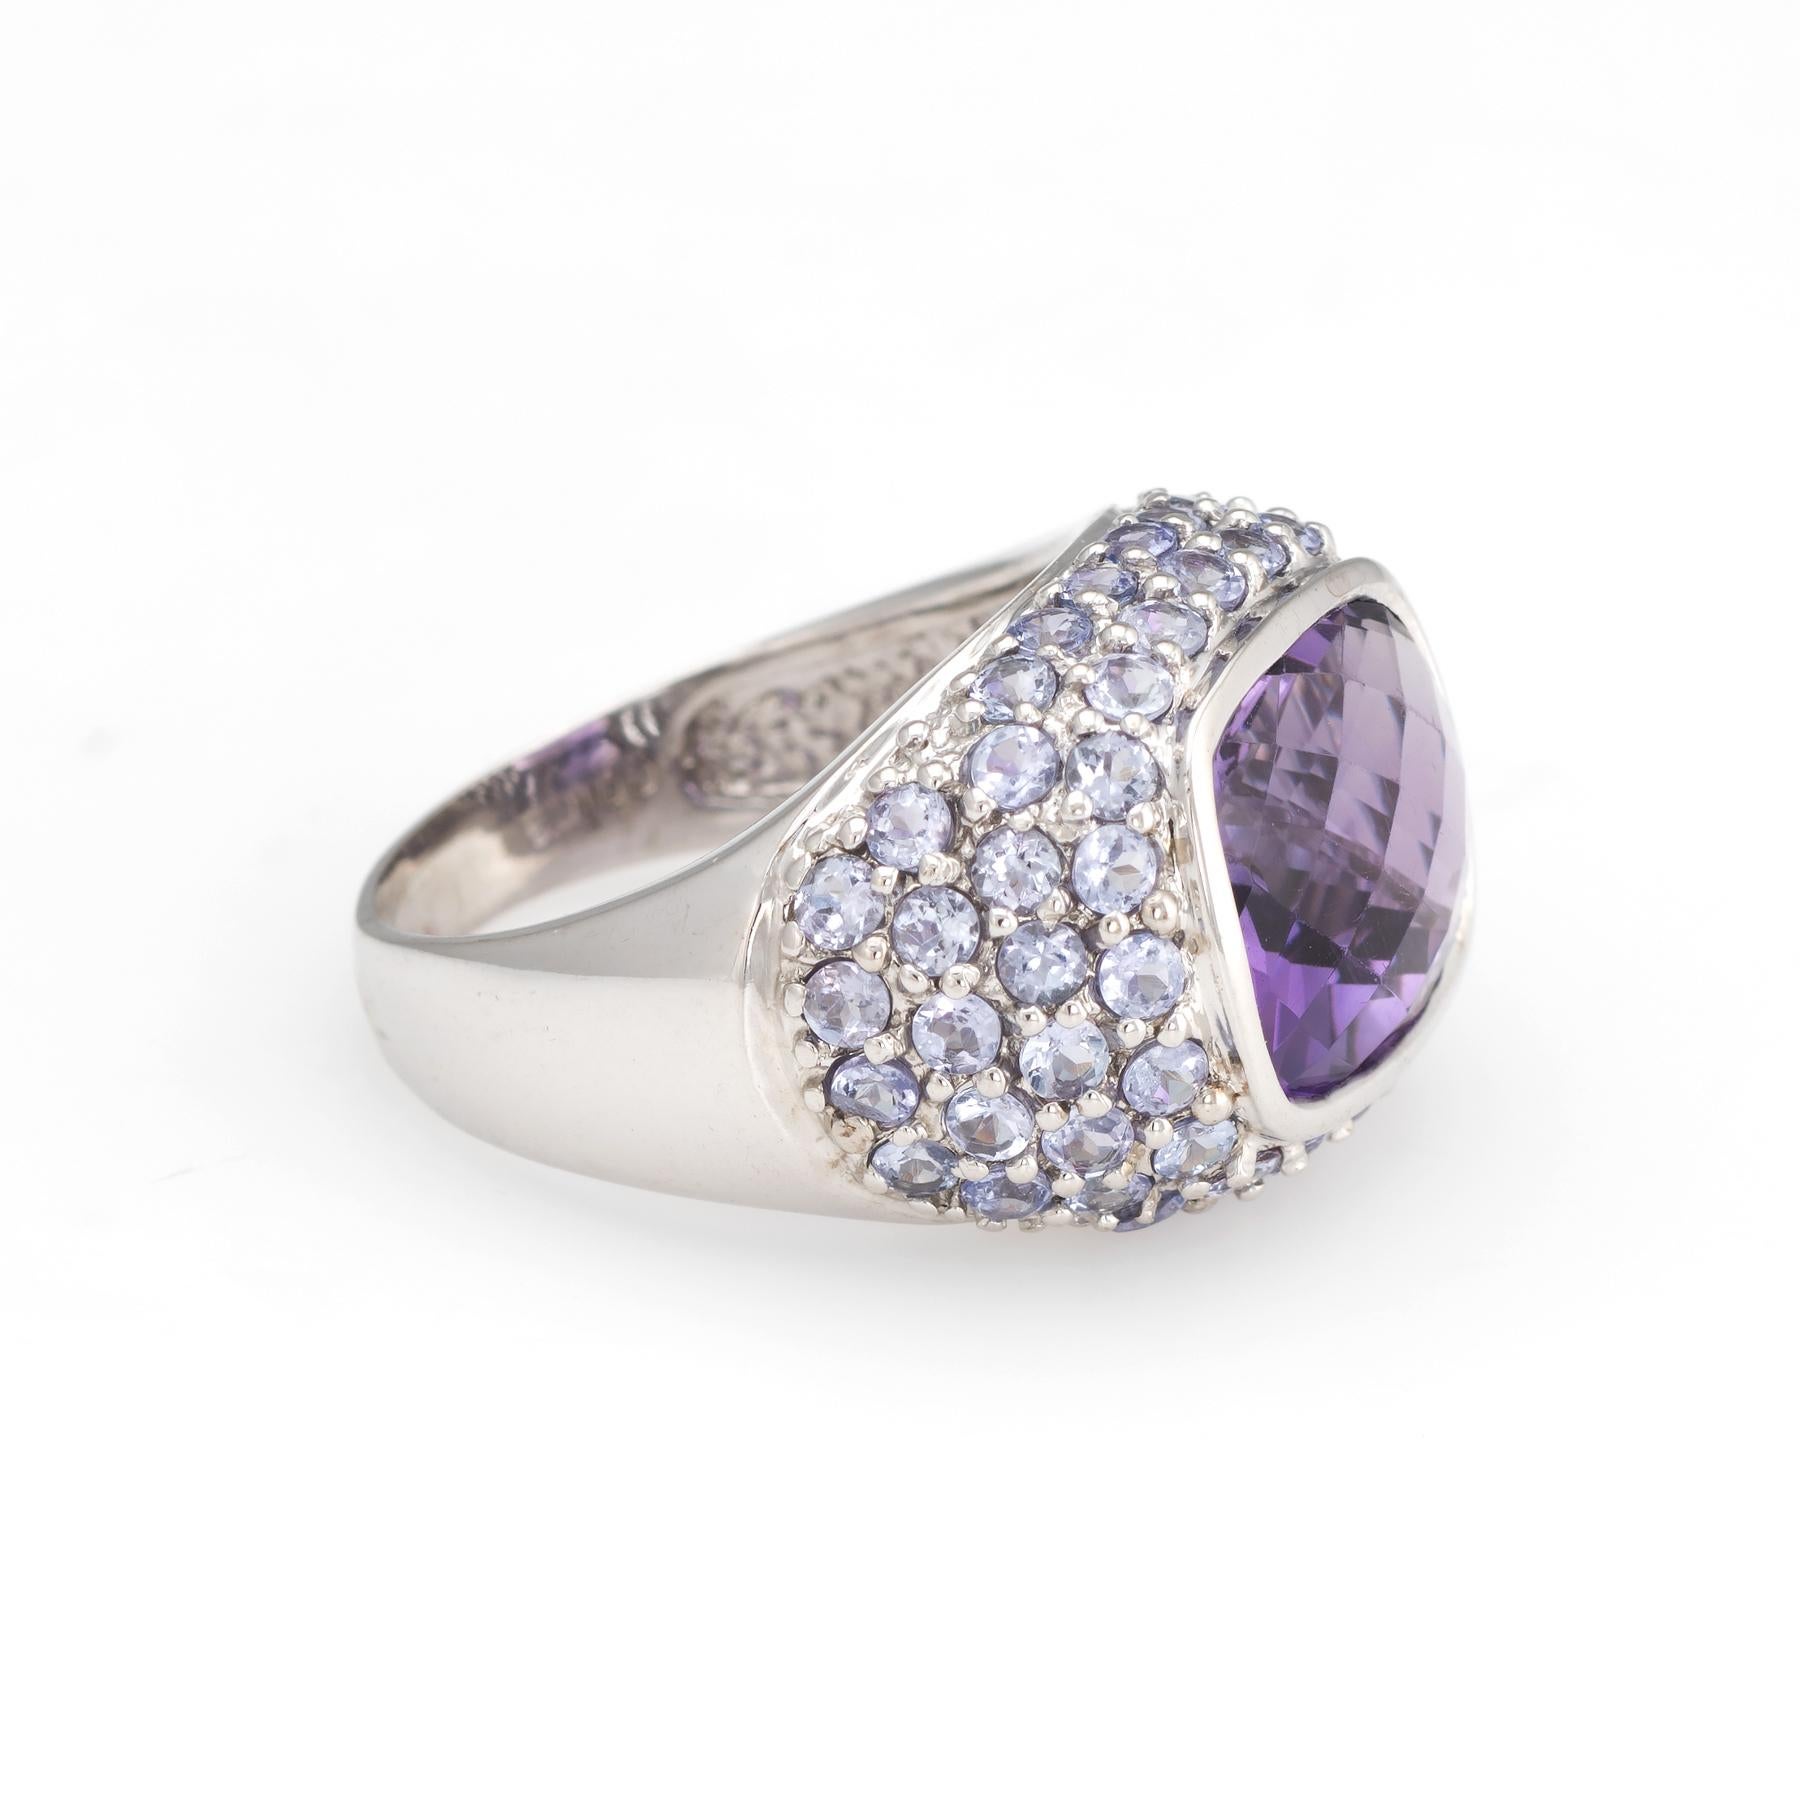 Finely detailed estate amethyst & iolite cocktail ring, crafted in 10 karat white gold. 

Checkerboard faceted amethyst measures 11mm x 10mm (estimated at 5 carats), accented with an estimated 0.75 carats of iolite. The amethyst is in excellent